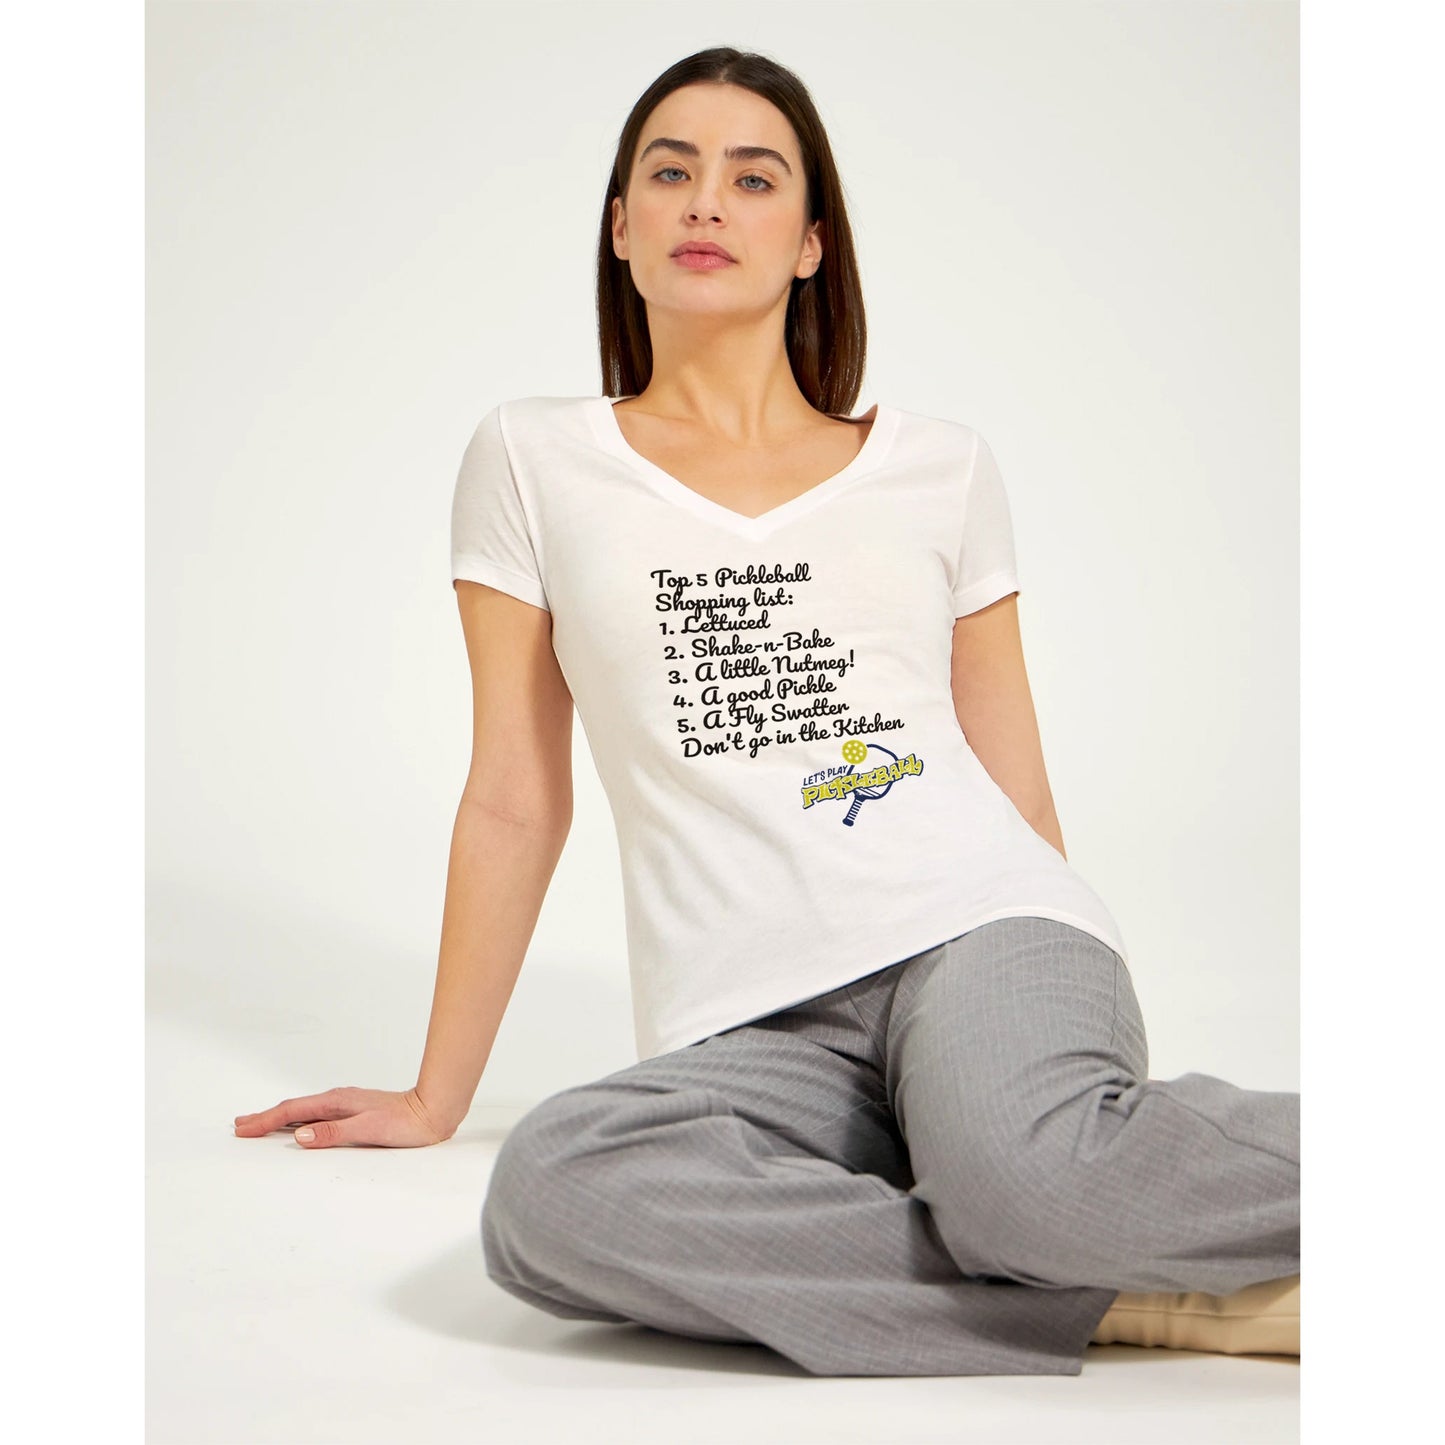 Dark haired Female model wearing Top 5 PickleBall list premium women’s V-neck t-shirt from WhatYa Say Apparel made from combed and ring-spun cotton sitting down.